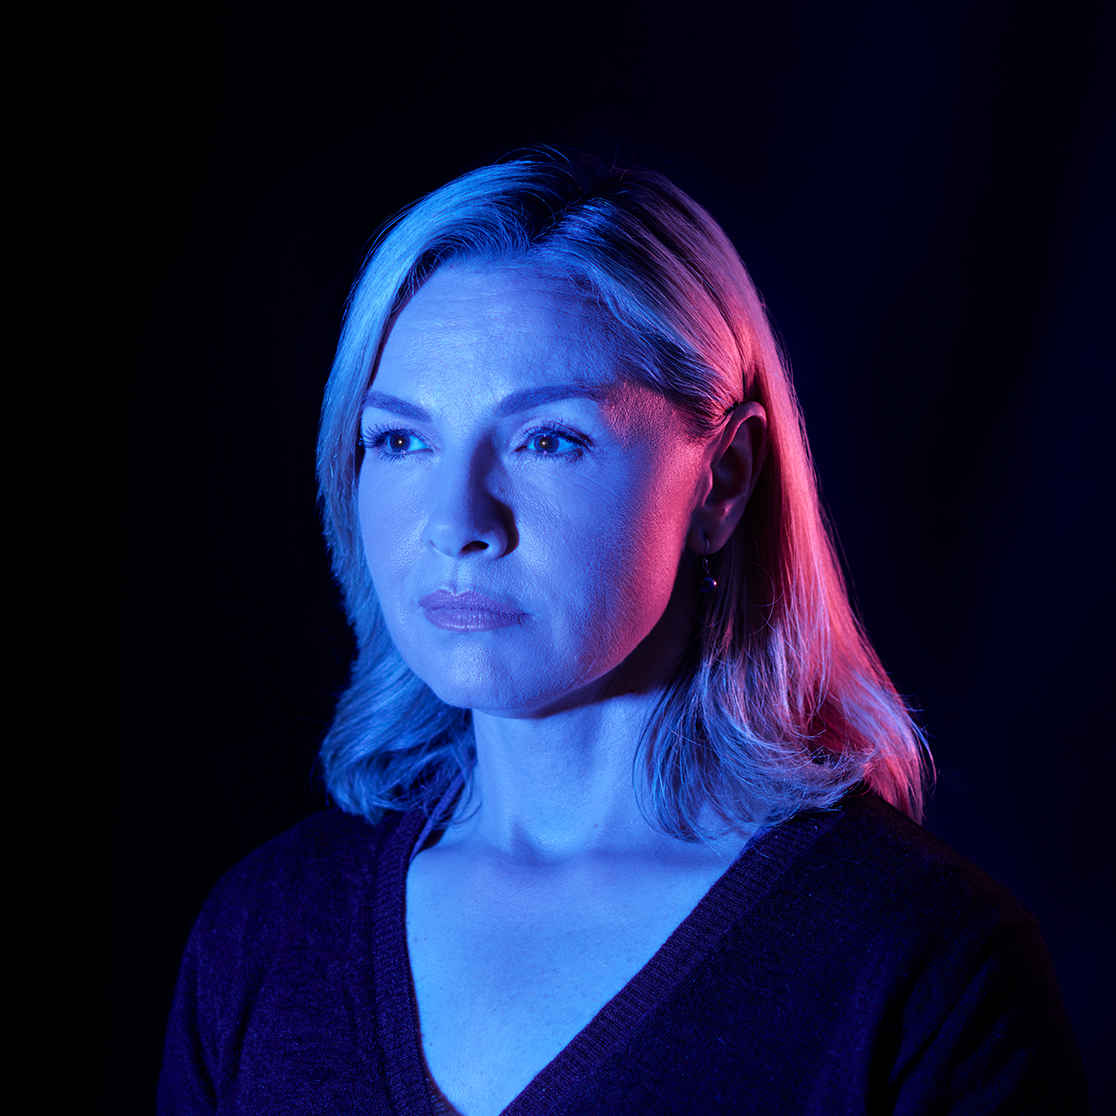 A blonde woman looks to the left of the camera with a serious expression. She is wearing a dark v-neck jumper and is under blue and pink light.